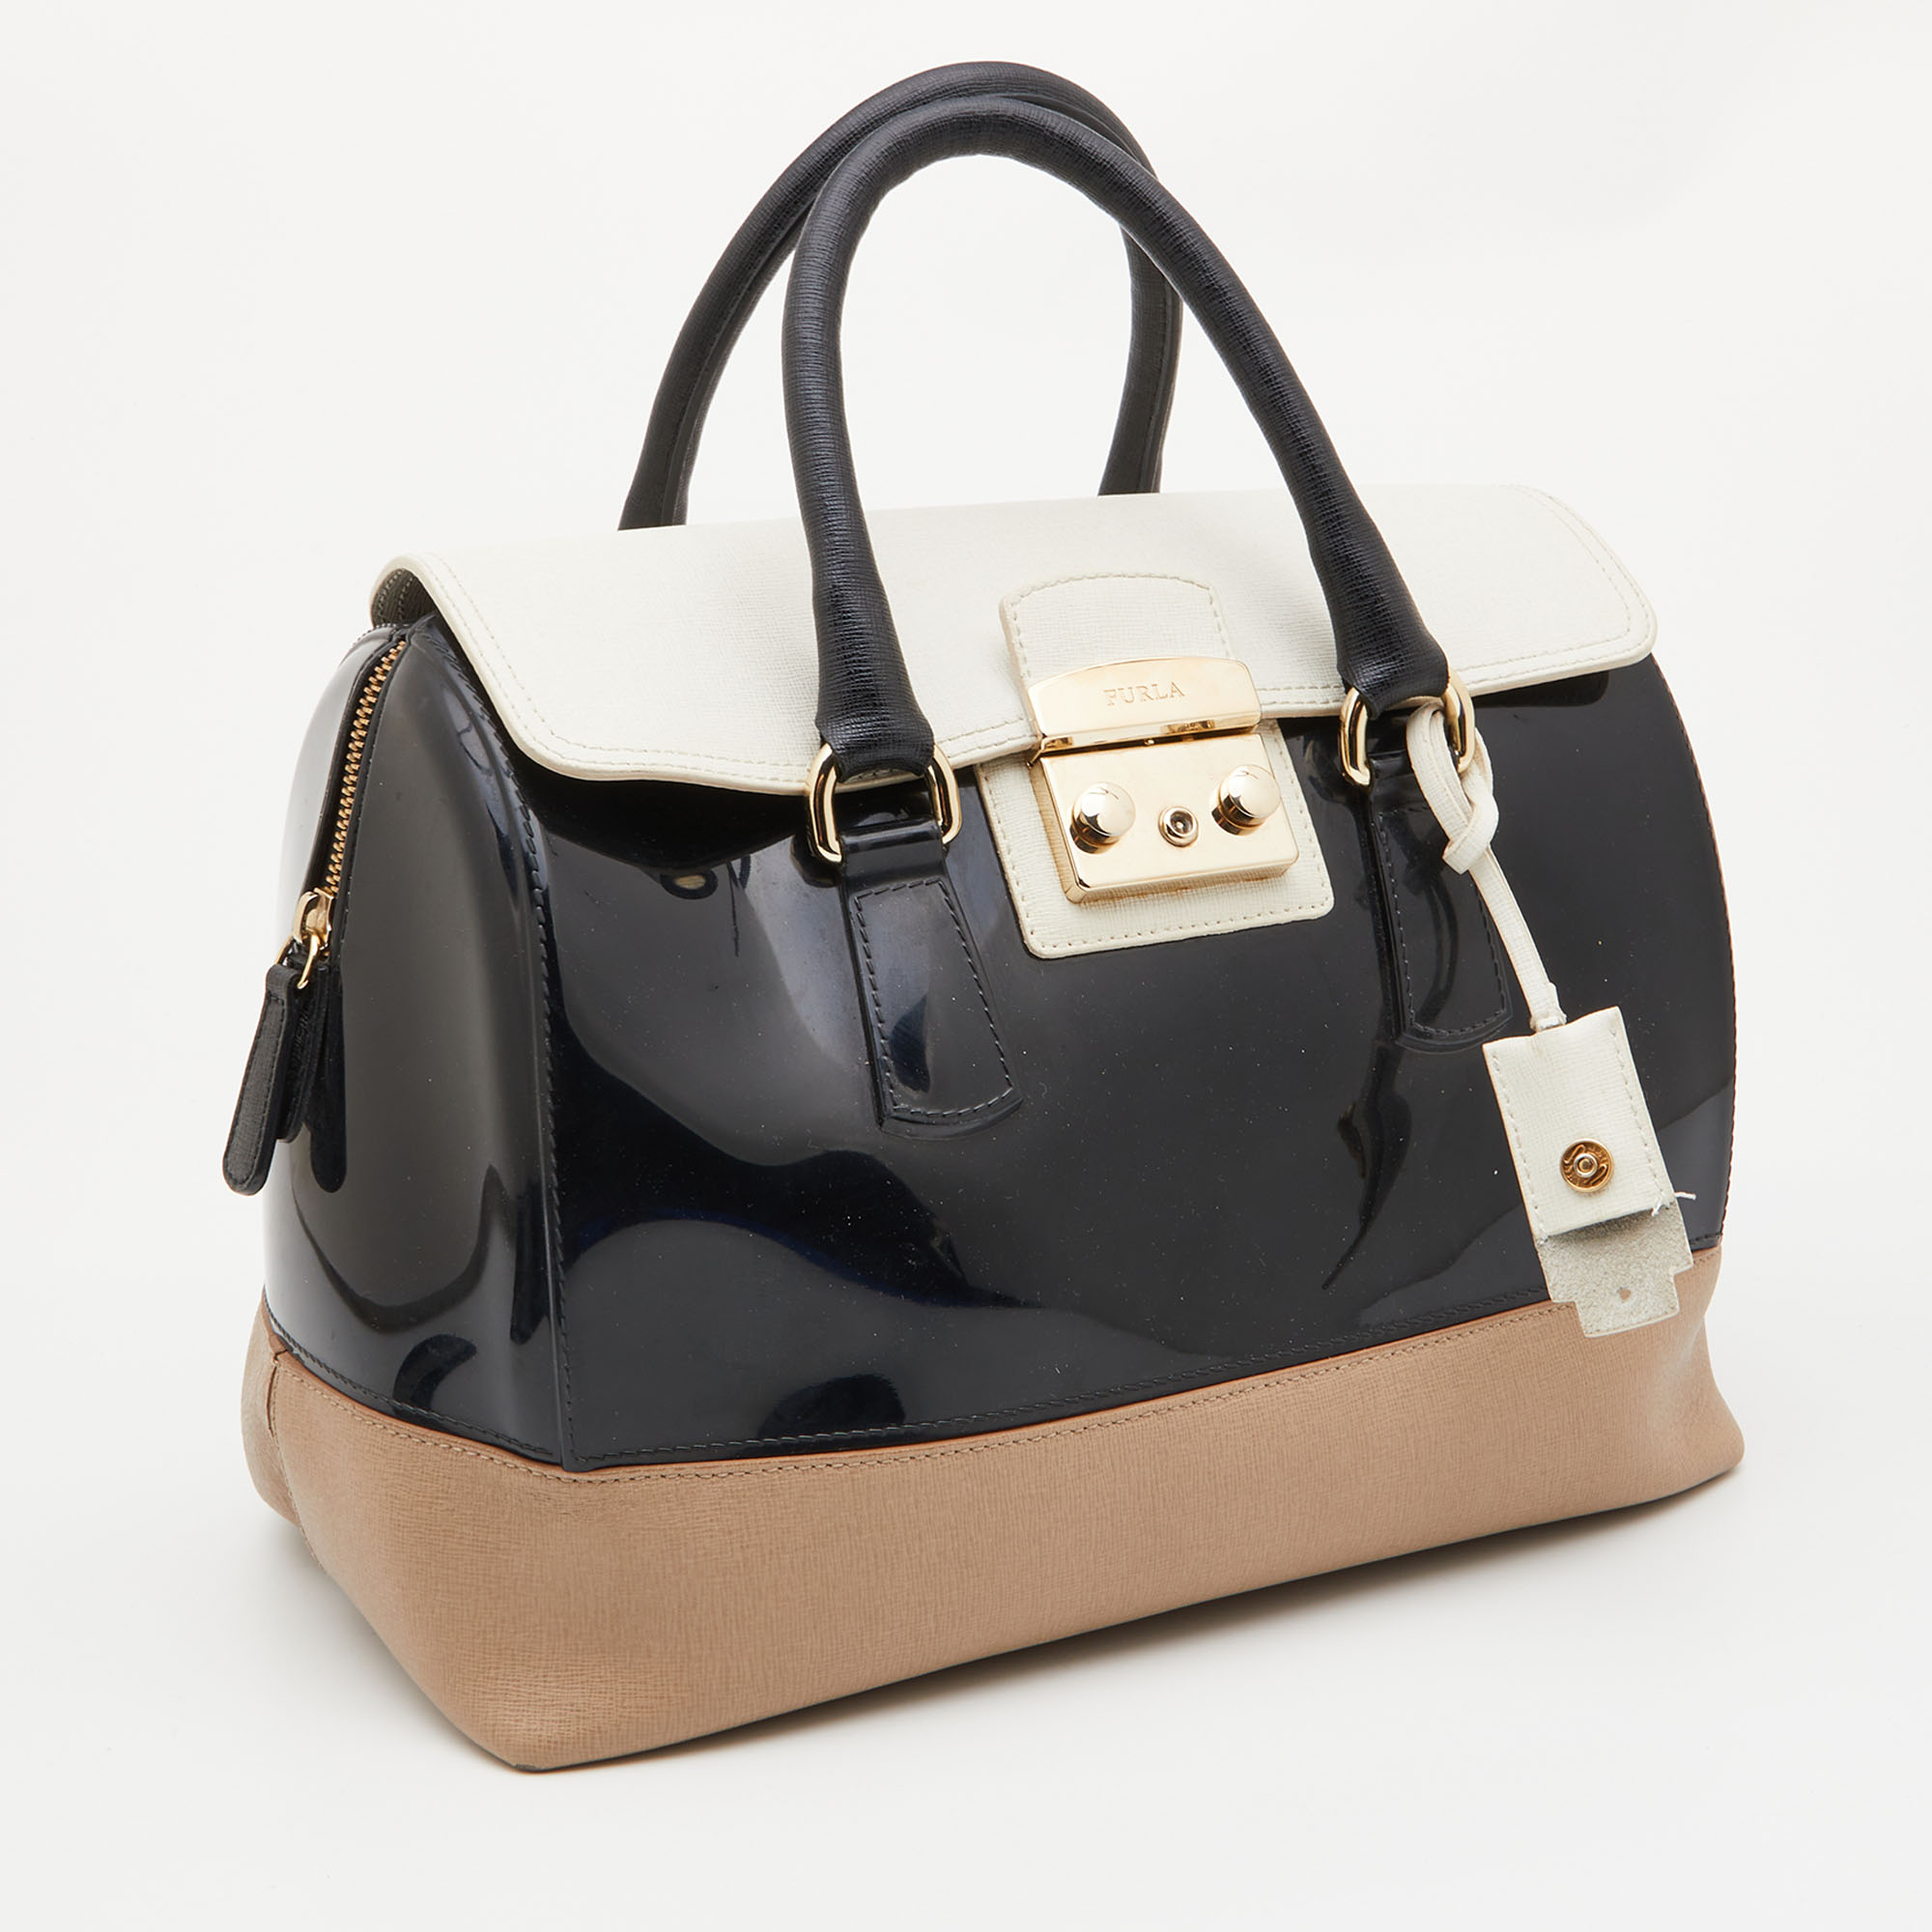 Furla Tricolor Rubber And Leather Candy Flap Satchel